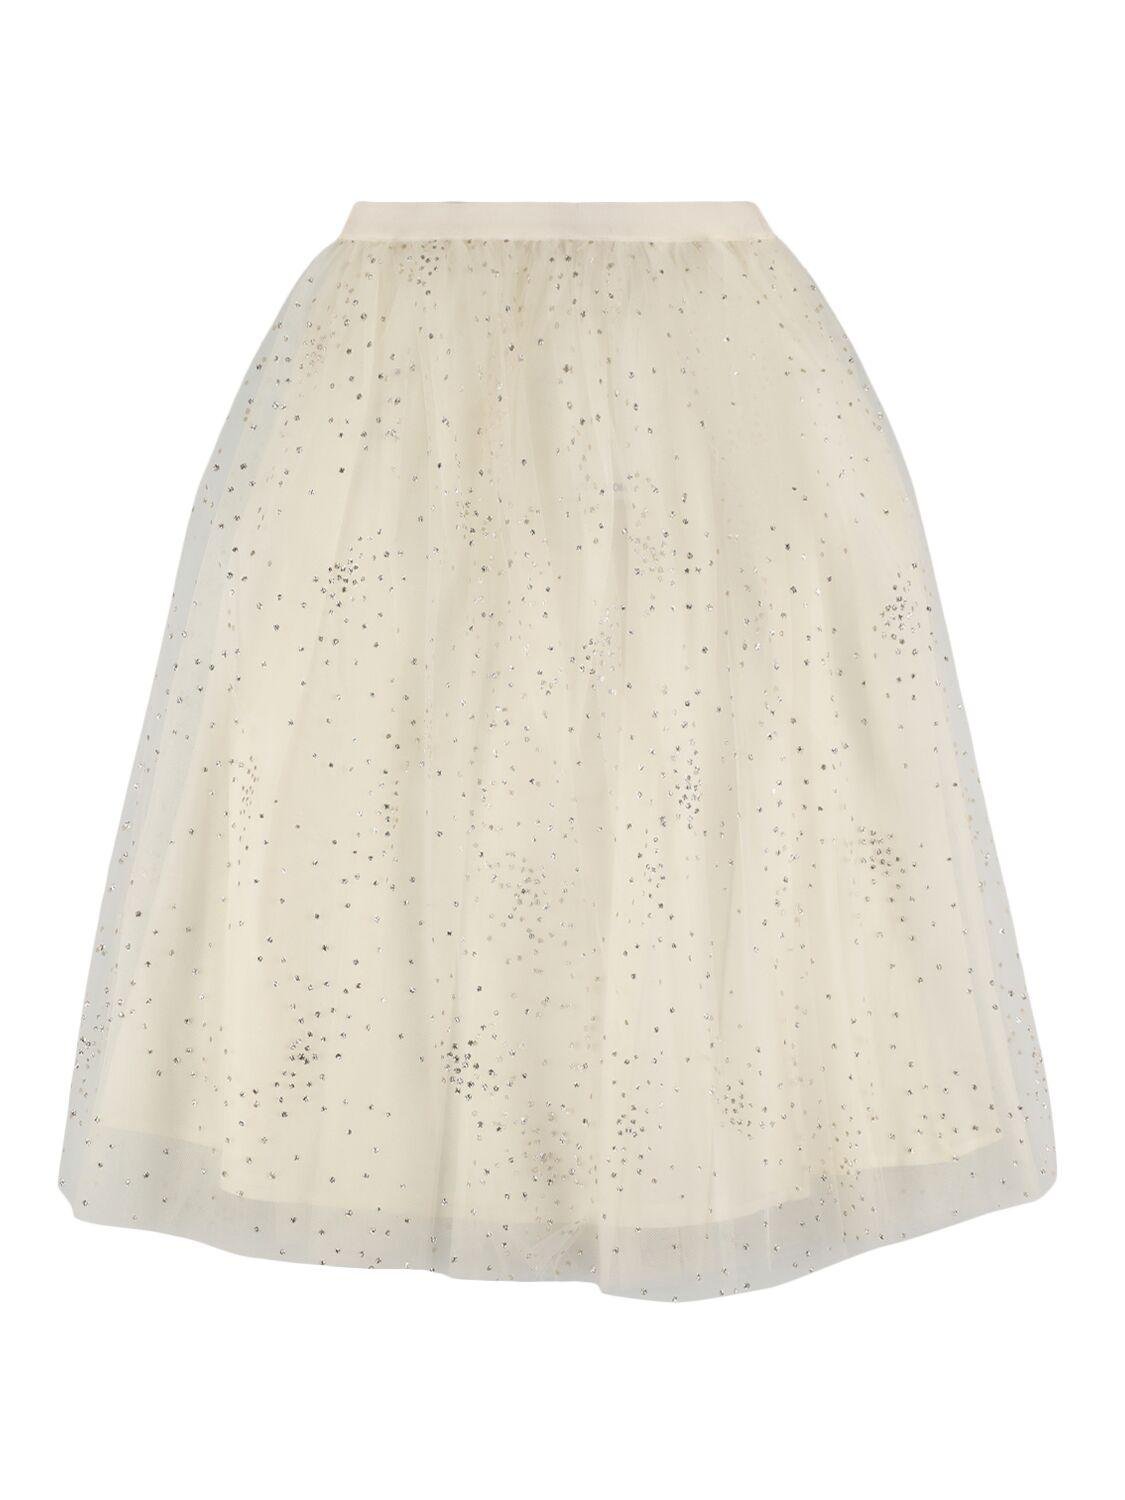 Glittered Stretch Tulle & Satin Skirt by BONPOINT